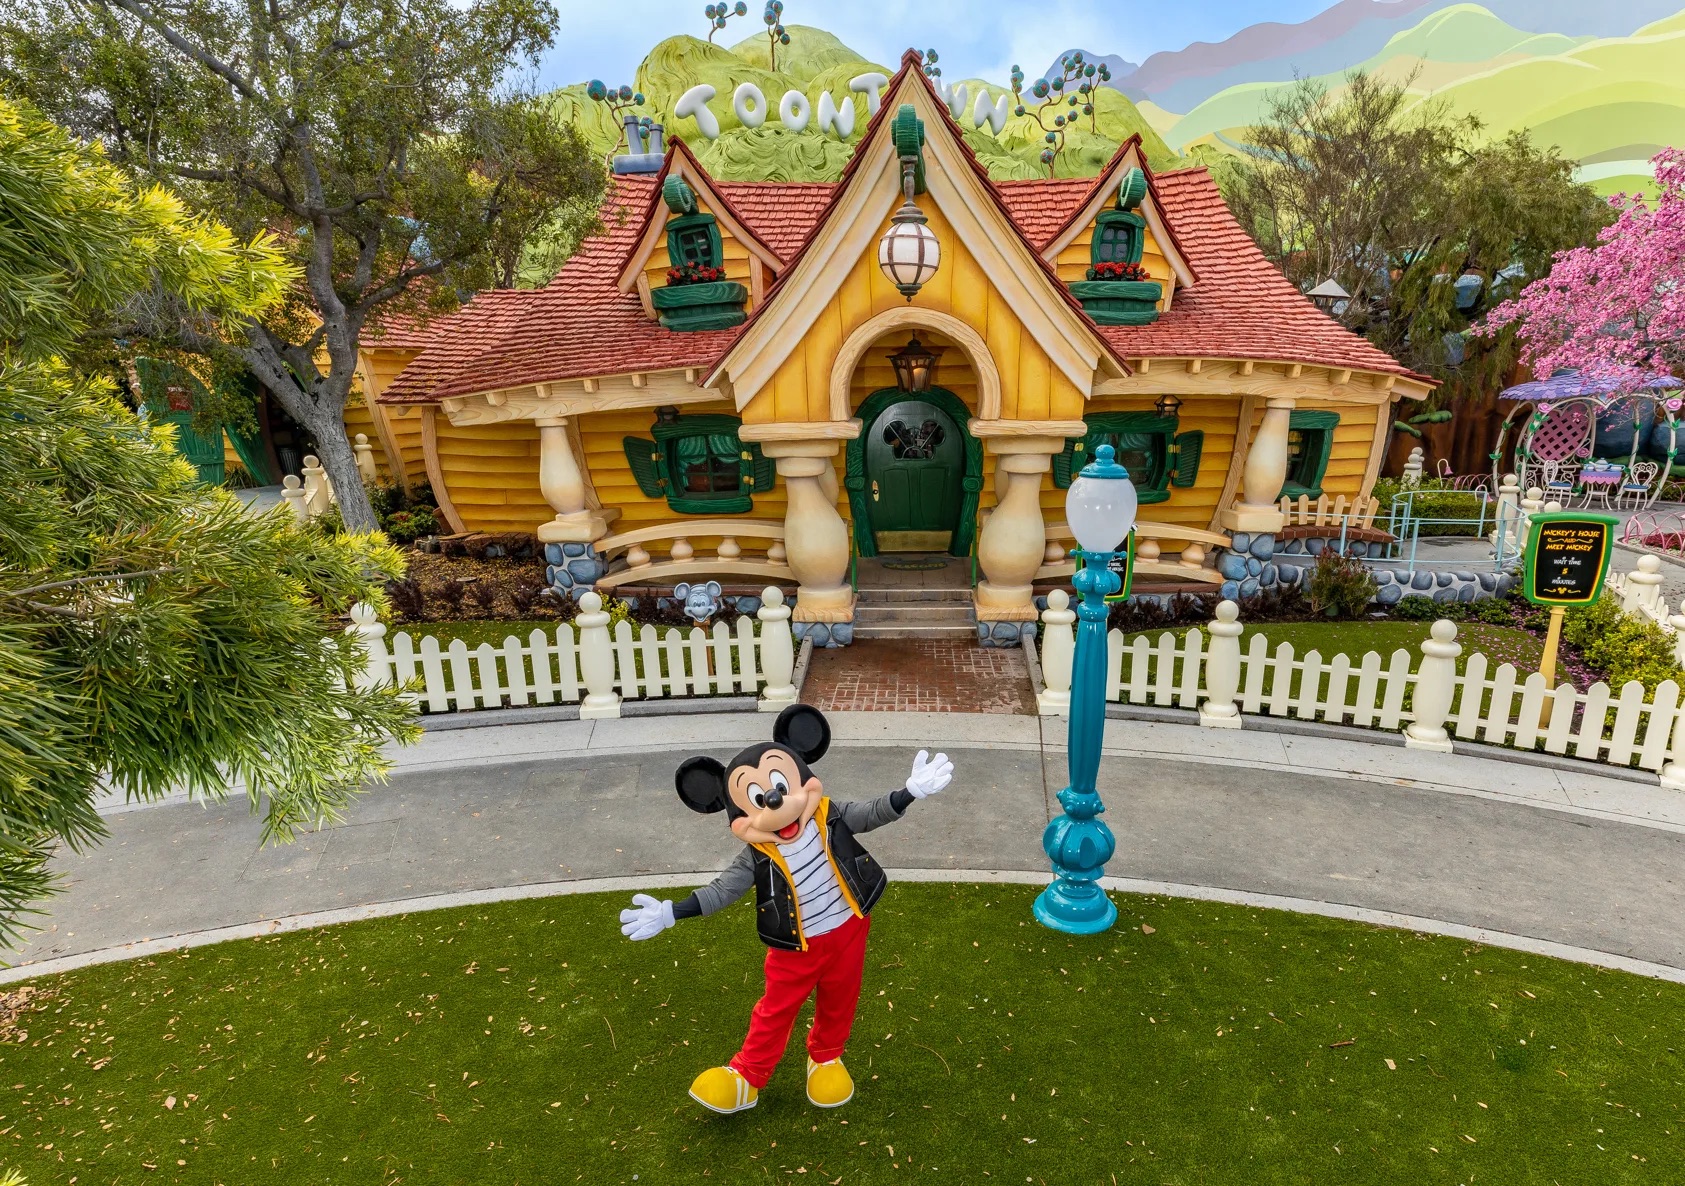 Mickey Mouse Sports New Outfit in the Reimagined Mickey’s Toontown at Disneyland Park